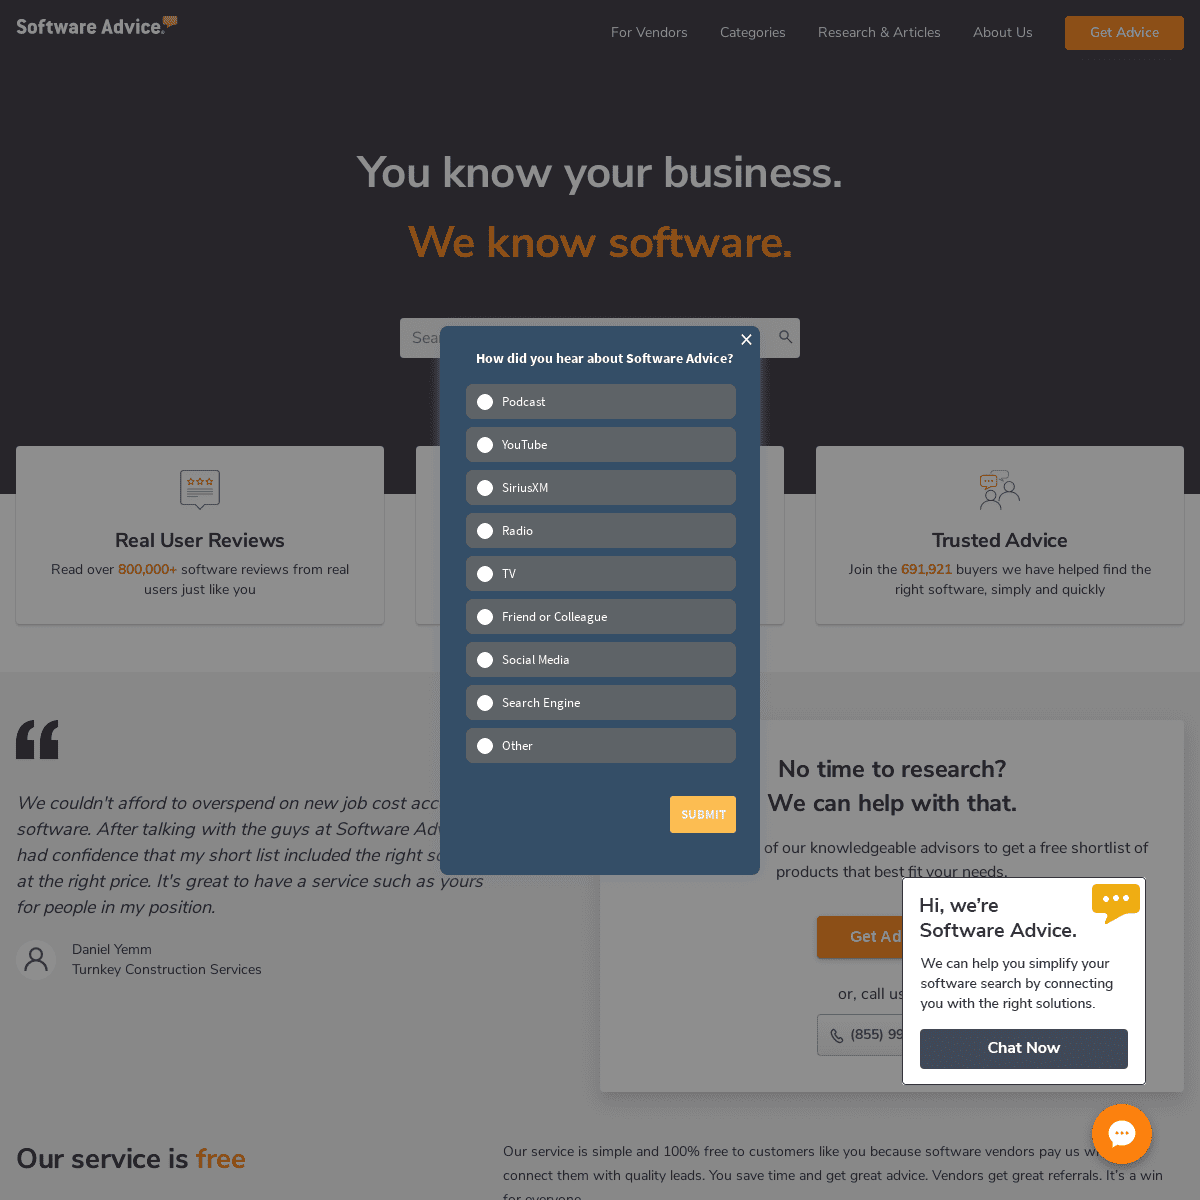 Business Software Reviews from Software Advice™